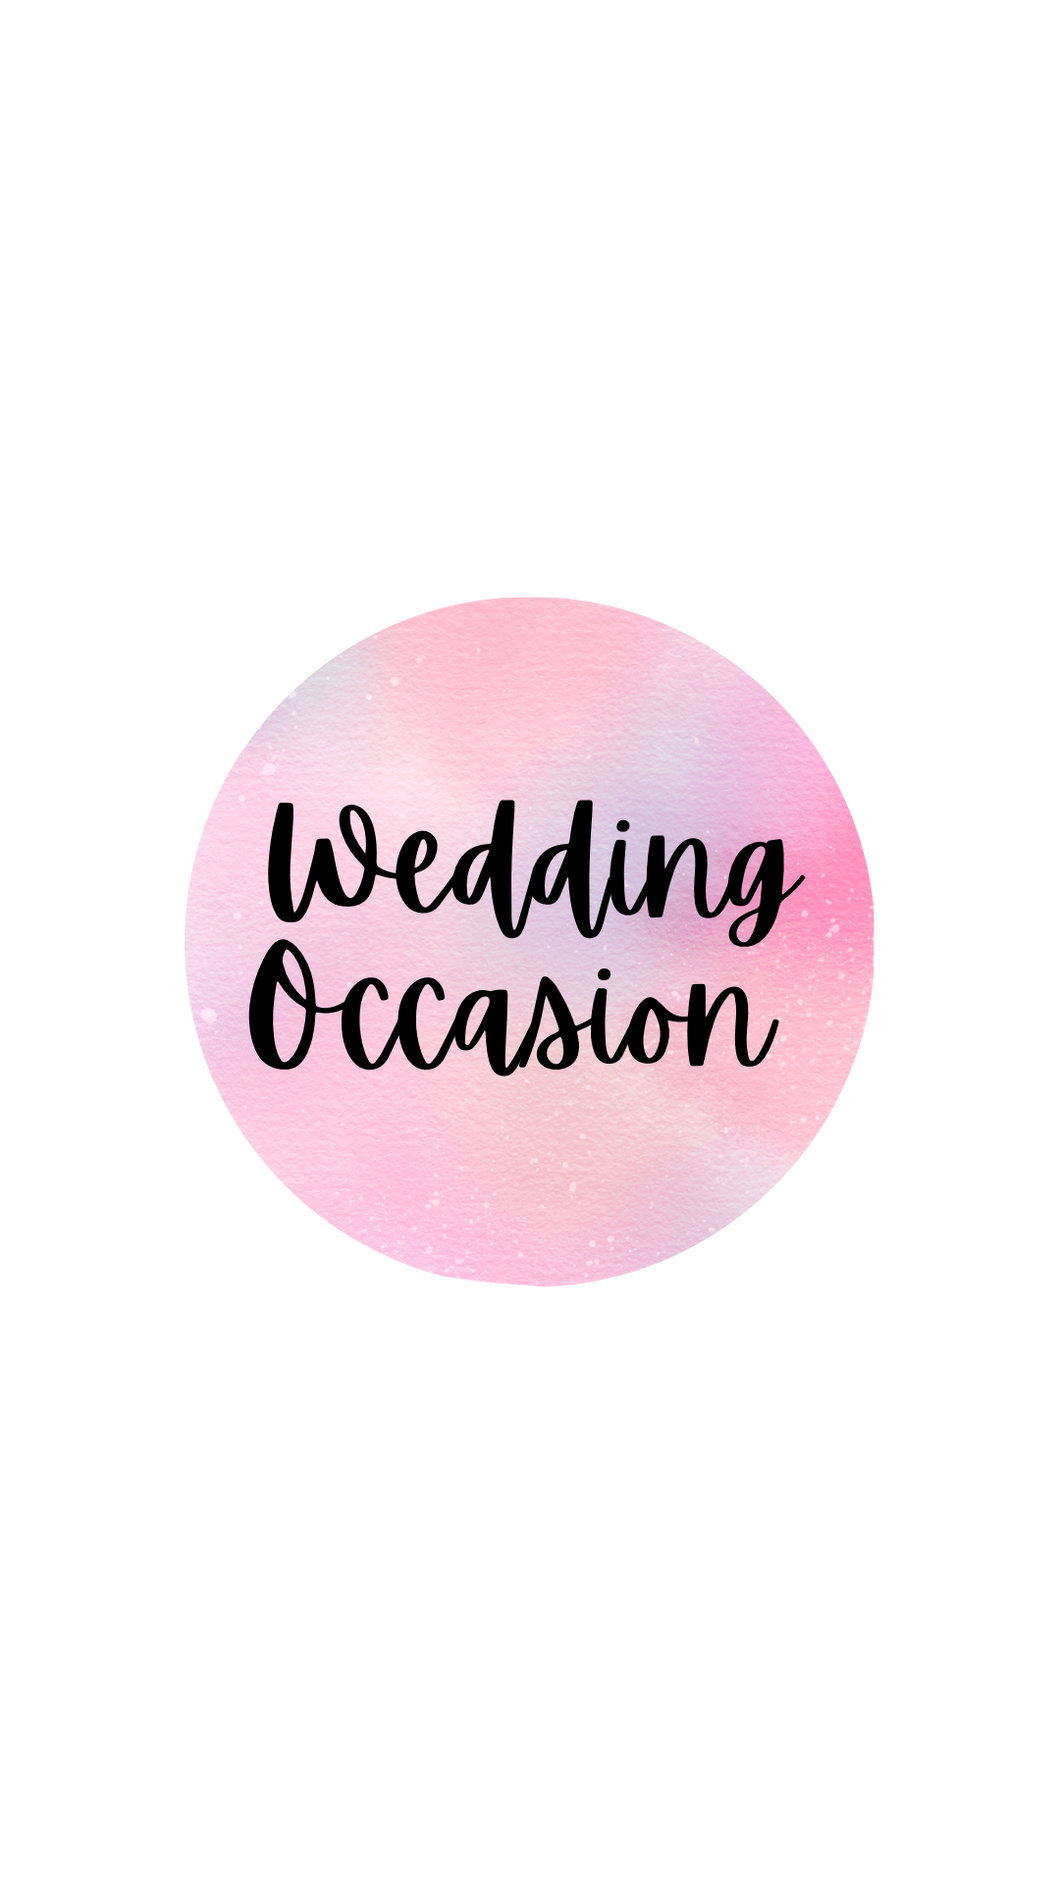 Pick a Wedding Occasion